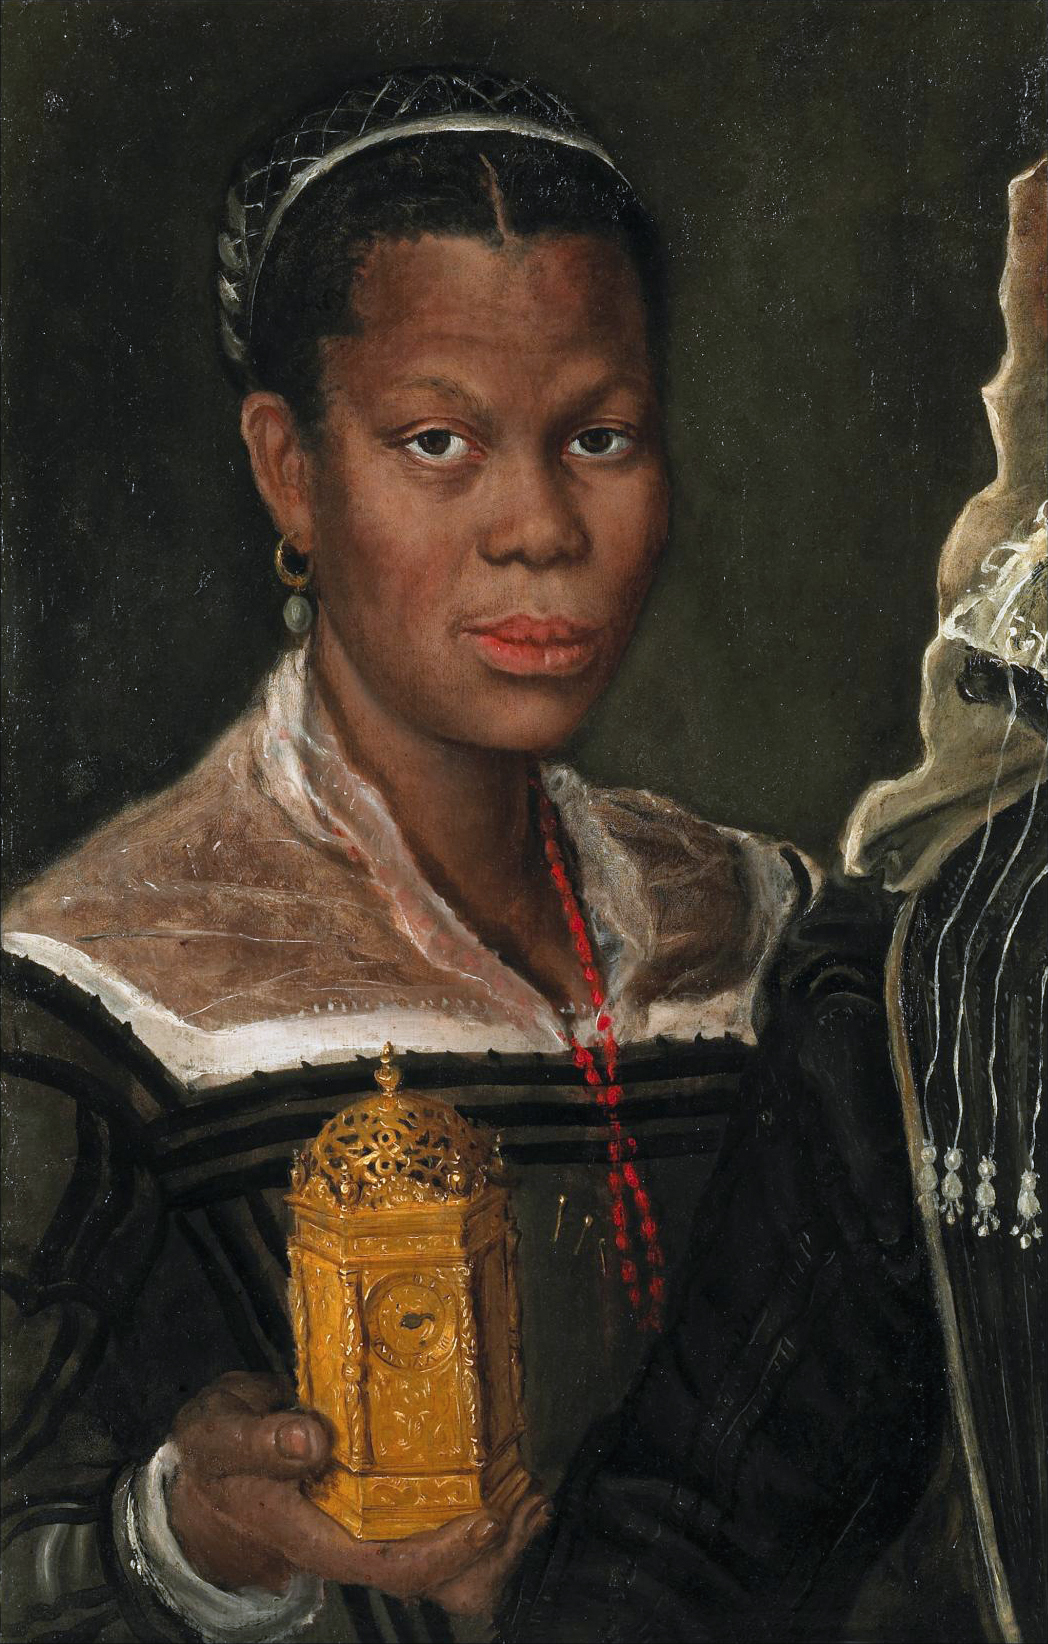 A portrait of a young African woman holding a clock and gazing at the viewer.